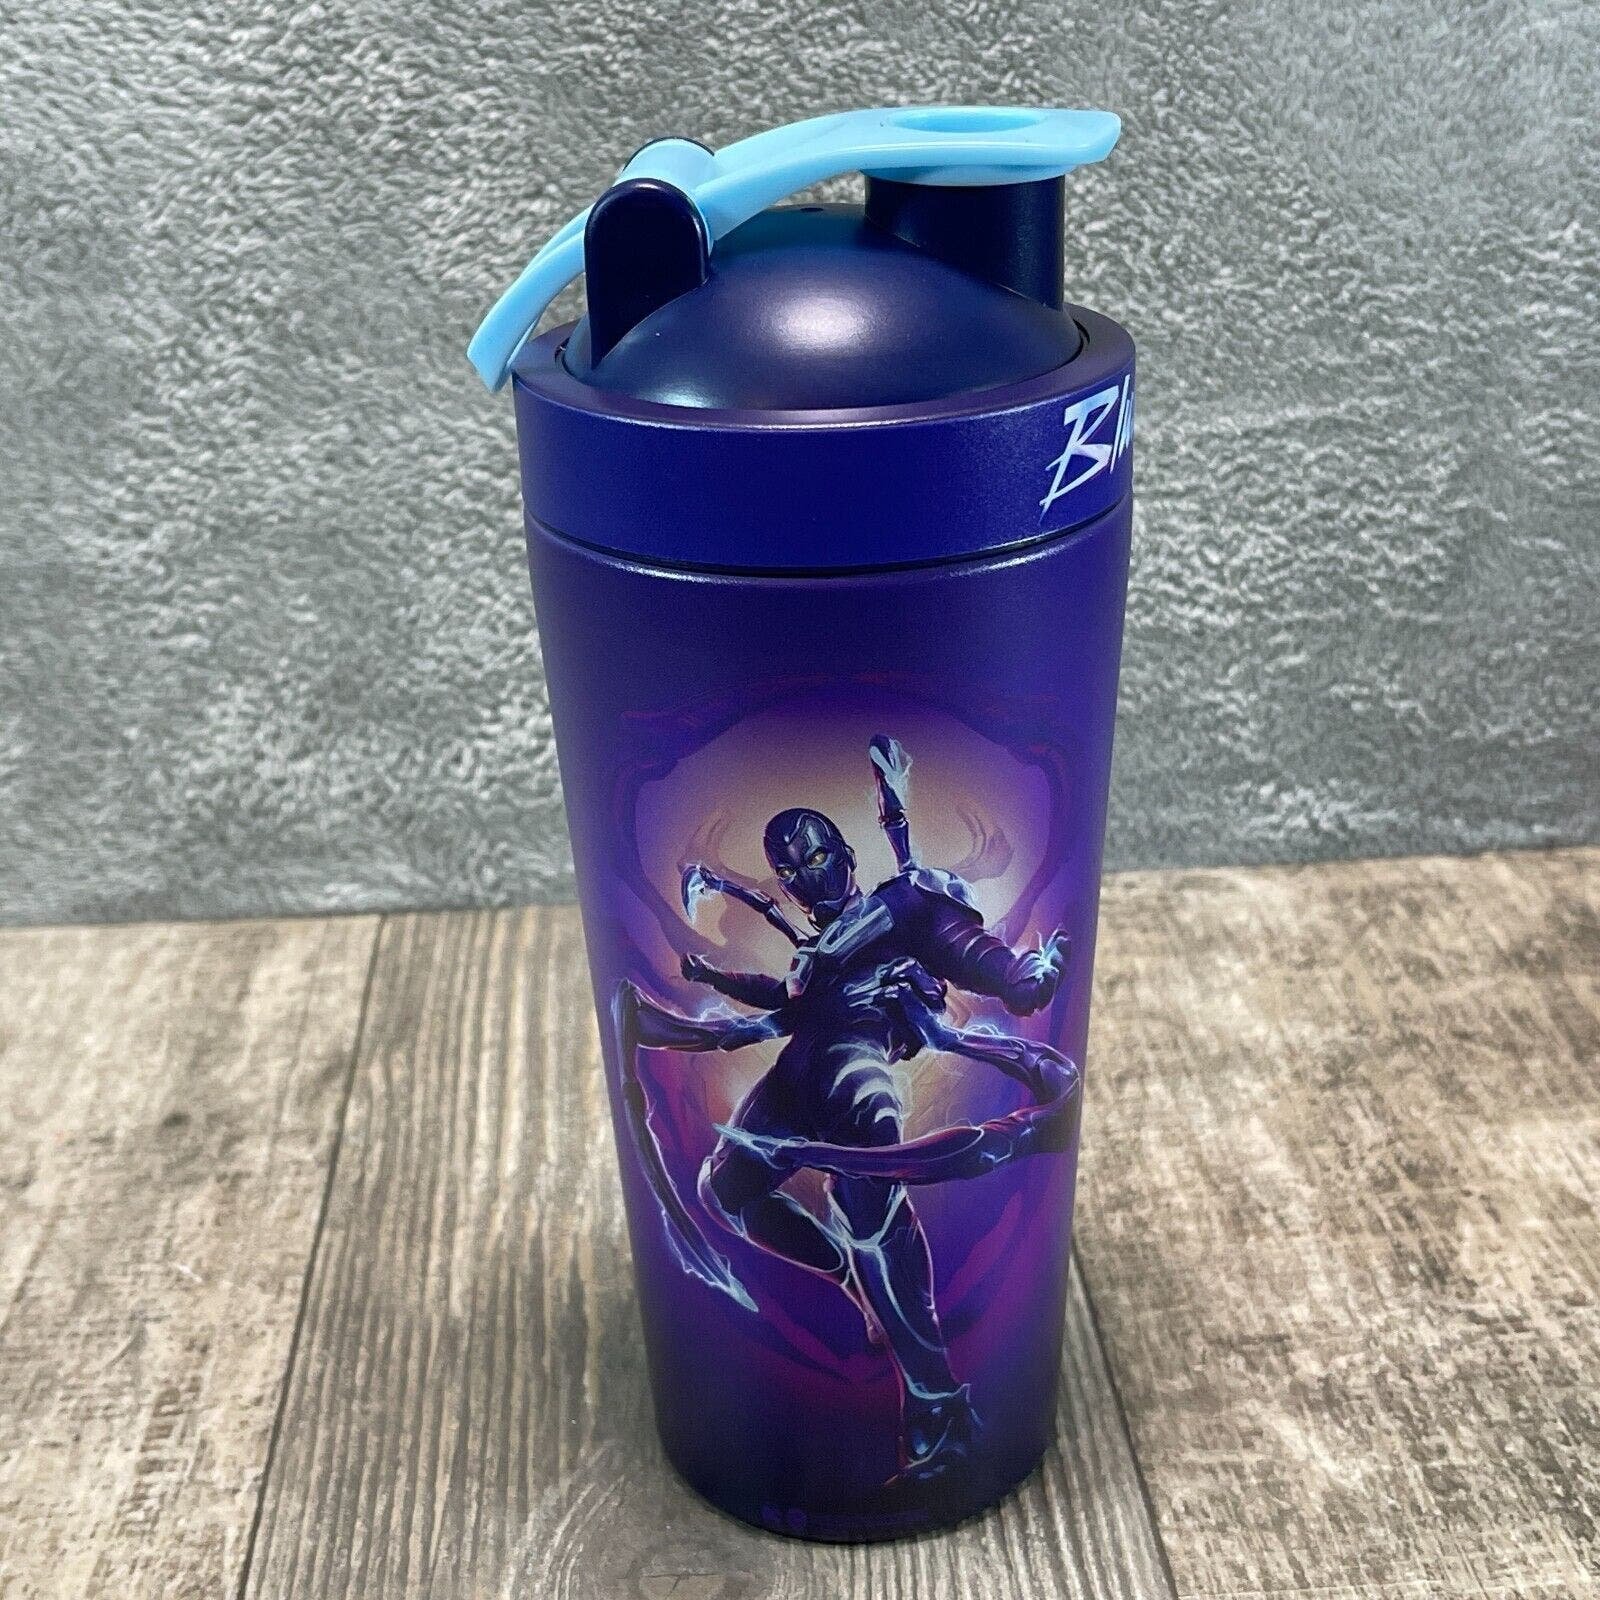 G FUEL DC Comics Blue Beetle Metal Collector´s Box GFUEL Shaker Only GrtBNXAL1